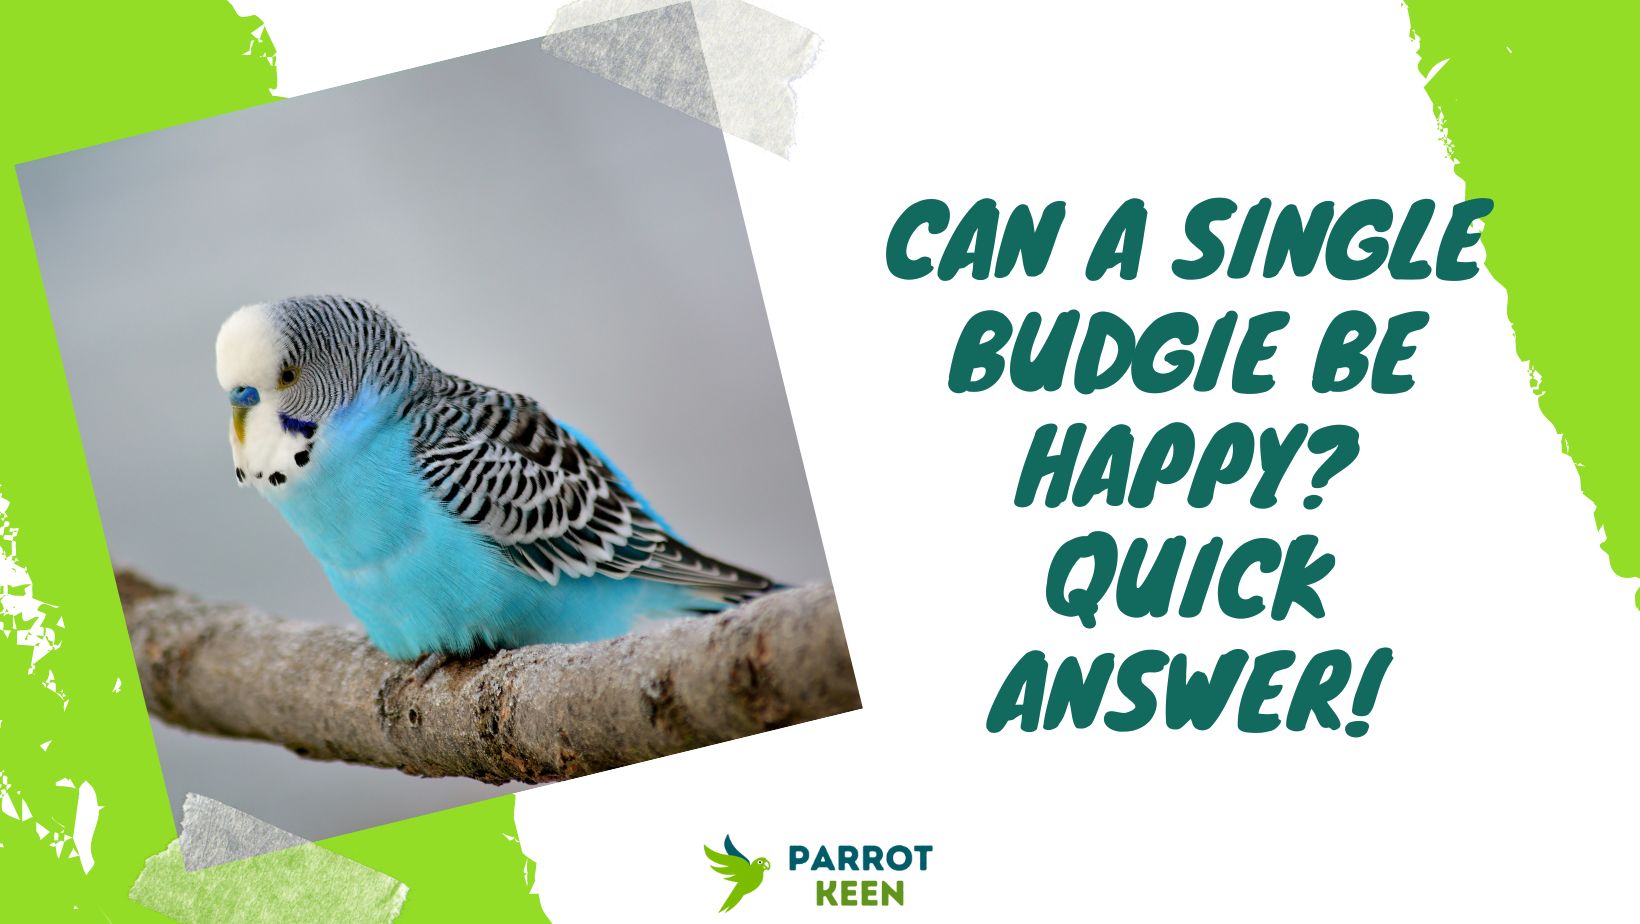 Can A Single Budgie Be Happy Quick Answer!